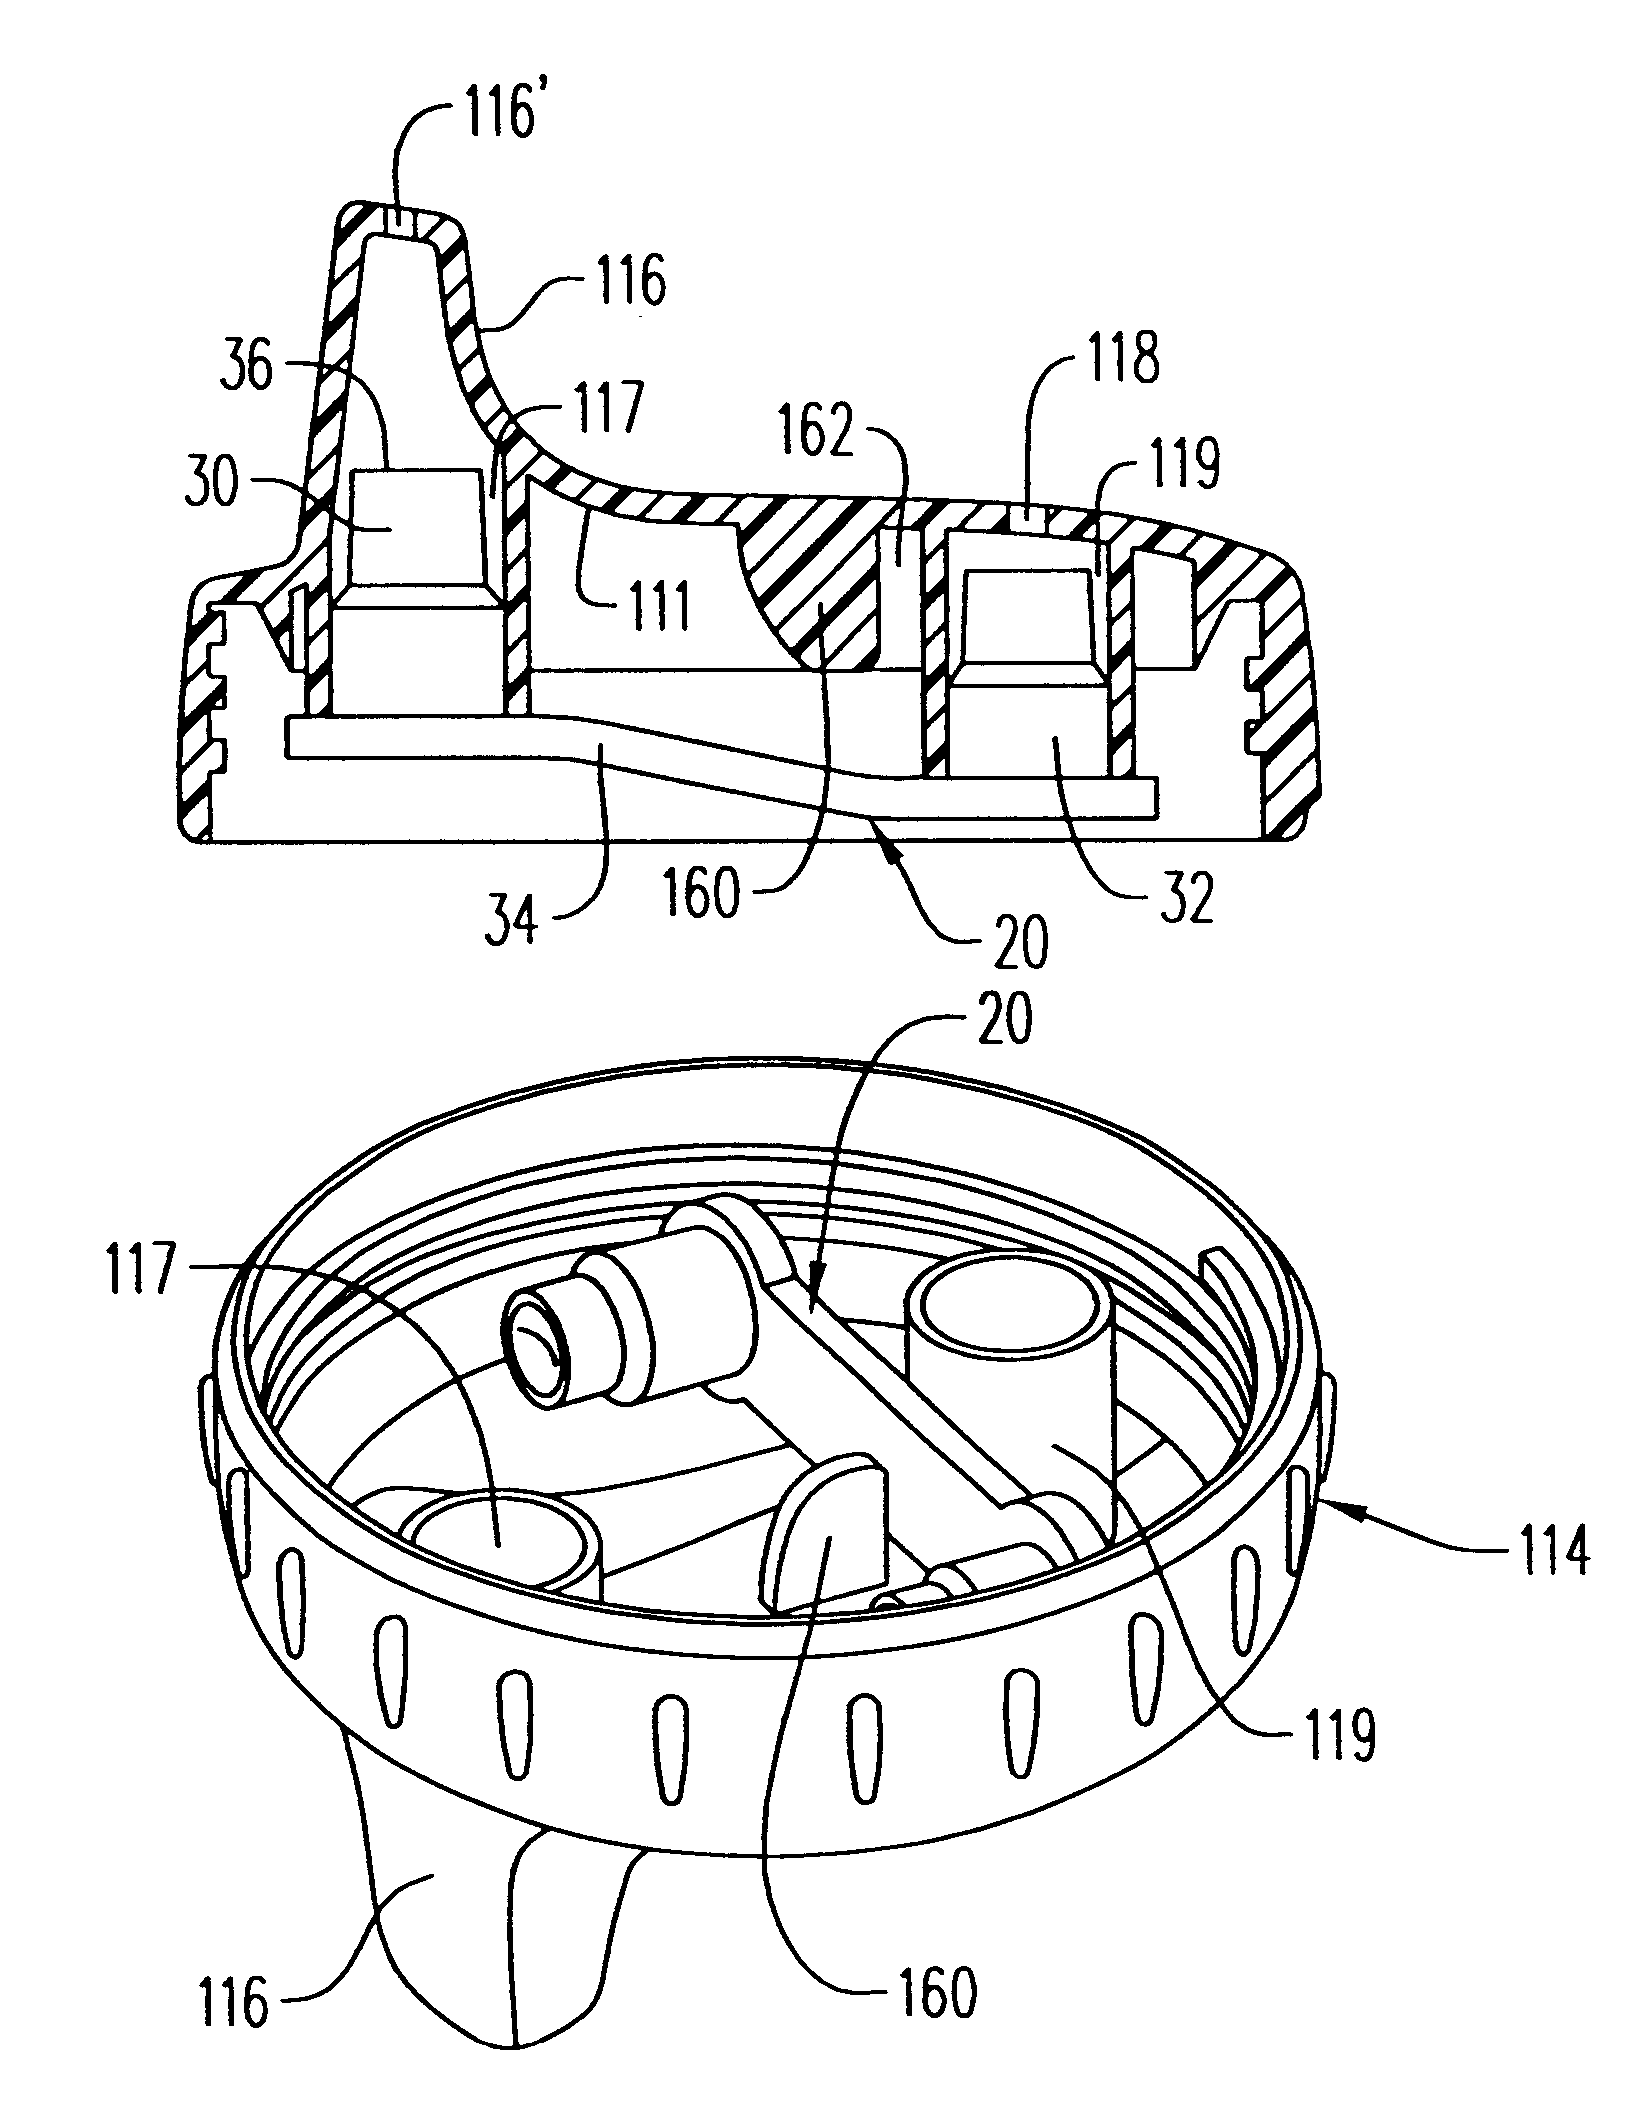 Cup assembly with retaining mechanism